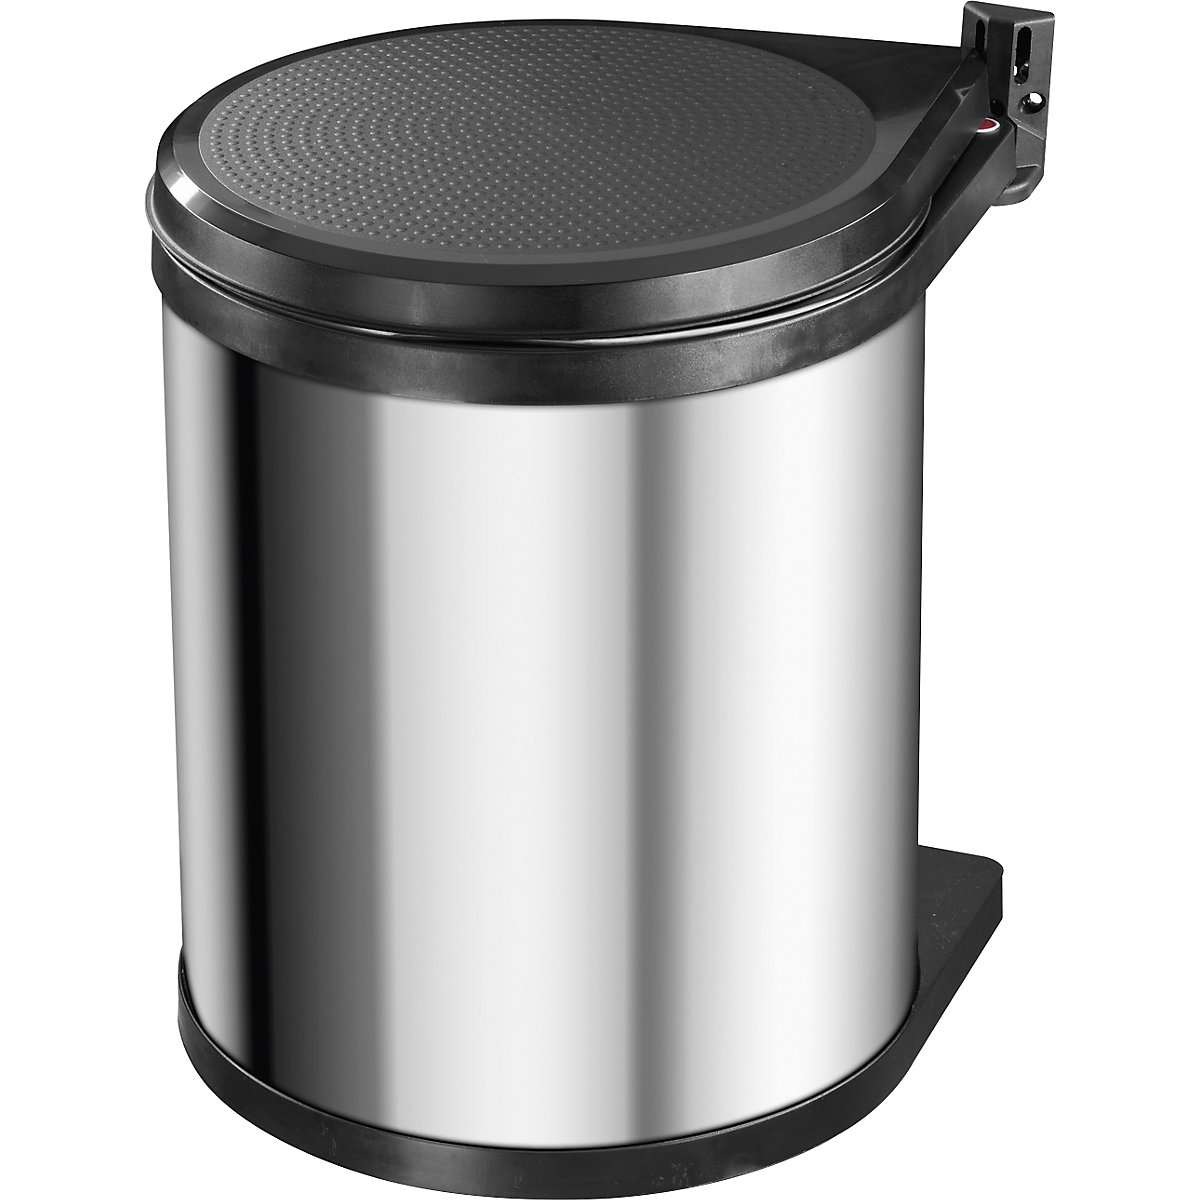 Compact-Box M built-in rubbish bin – Hailo, with lid lift system, 1 x 15 l, stainless steel-5